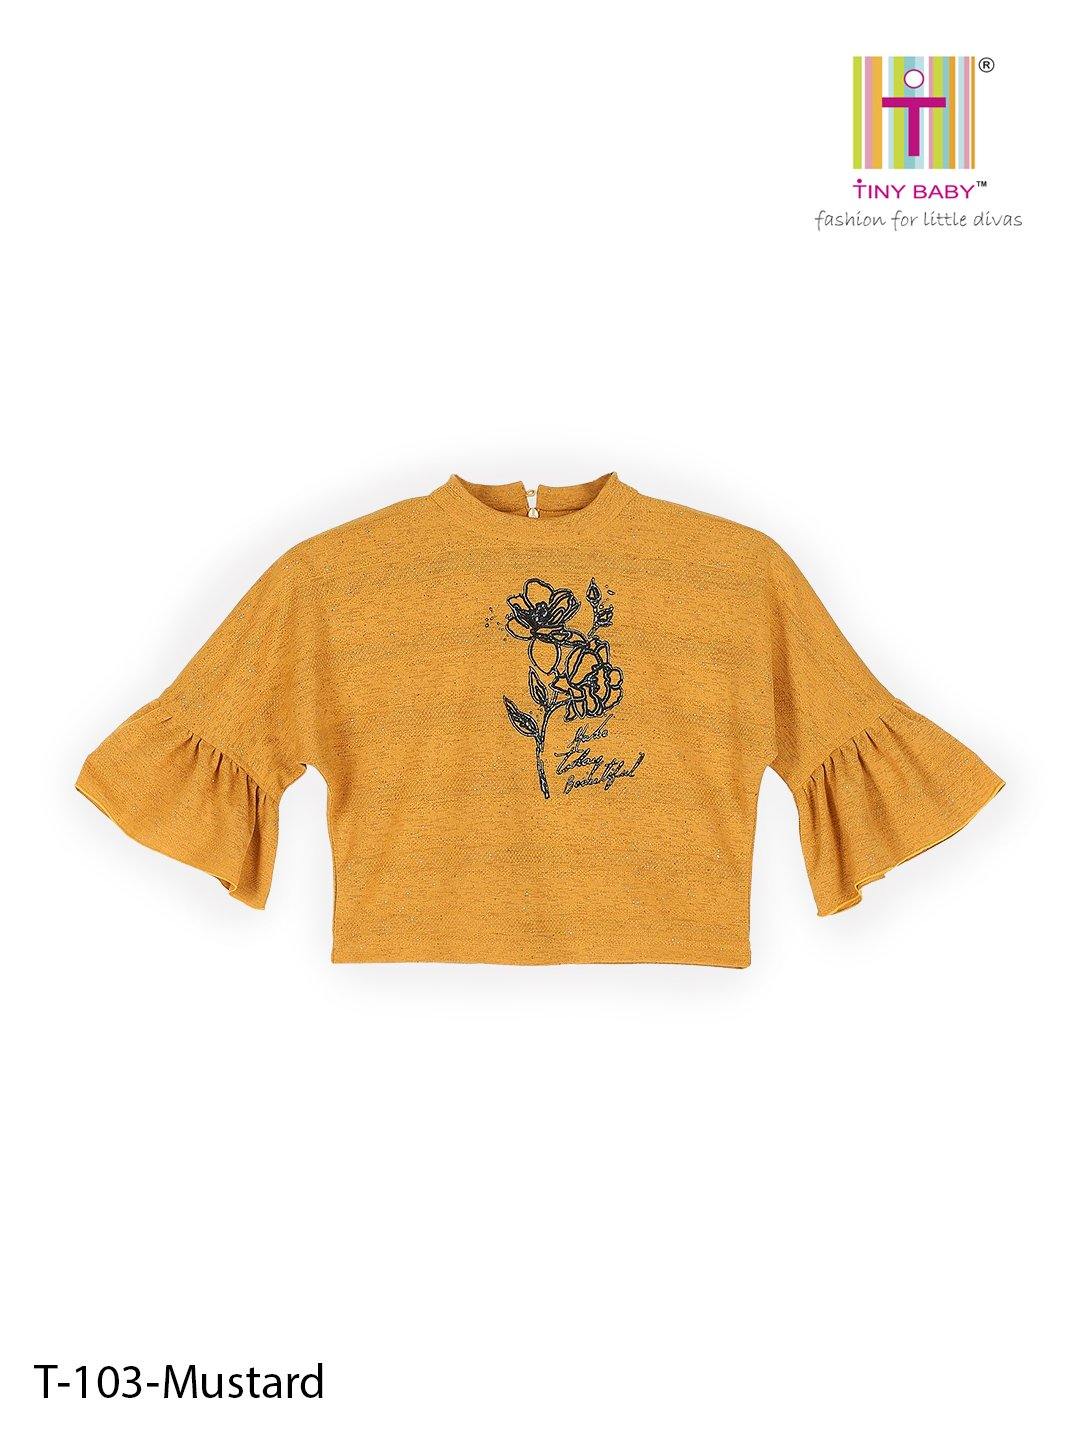 Tiny Baby Mustard Colored Top T-103-Mustard - TINY BABY INDIA shop.tinybaby.in